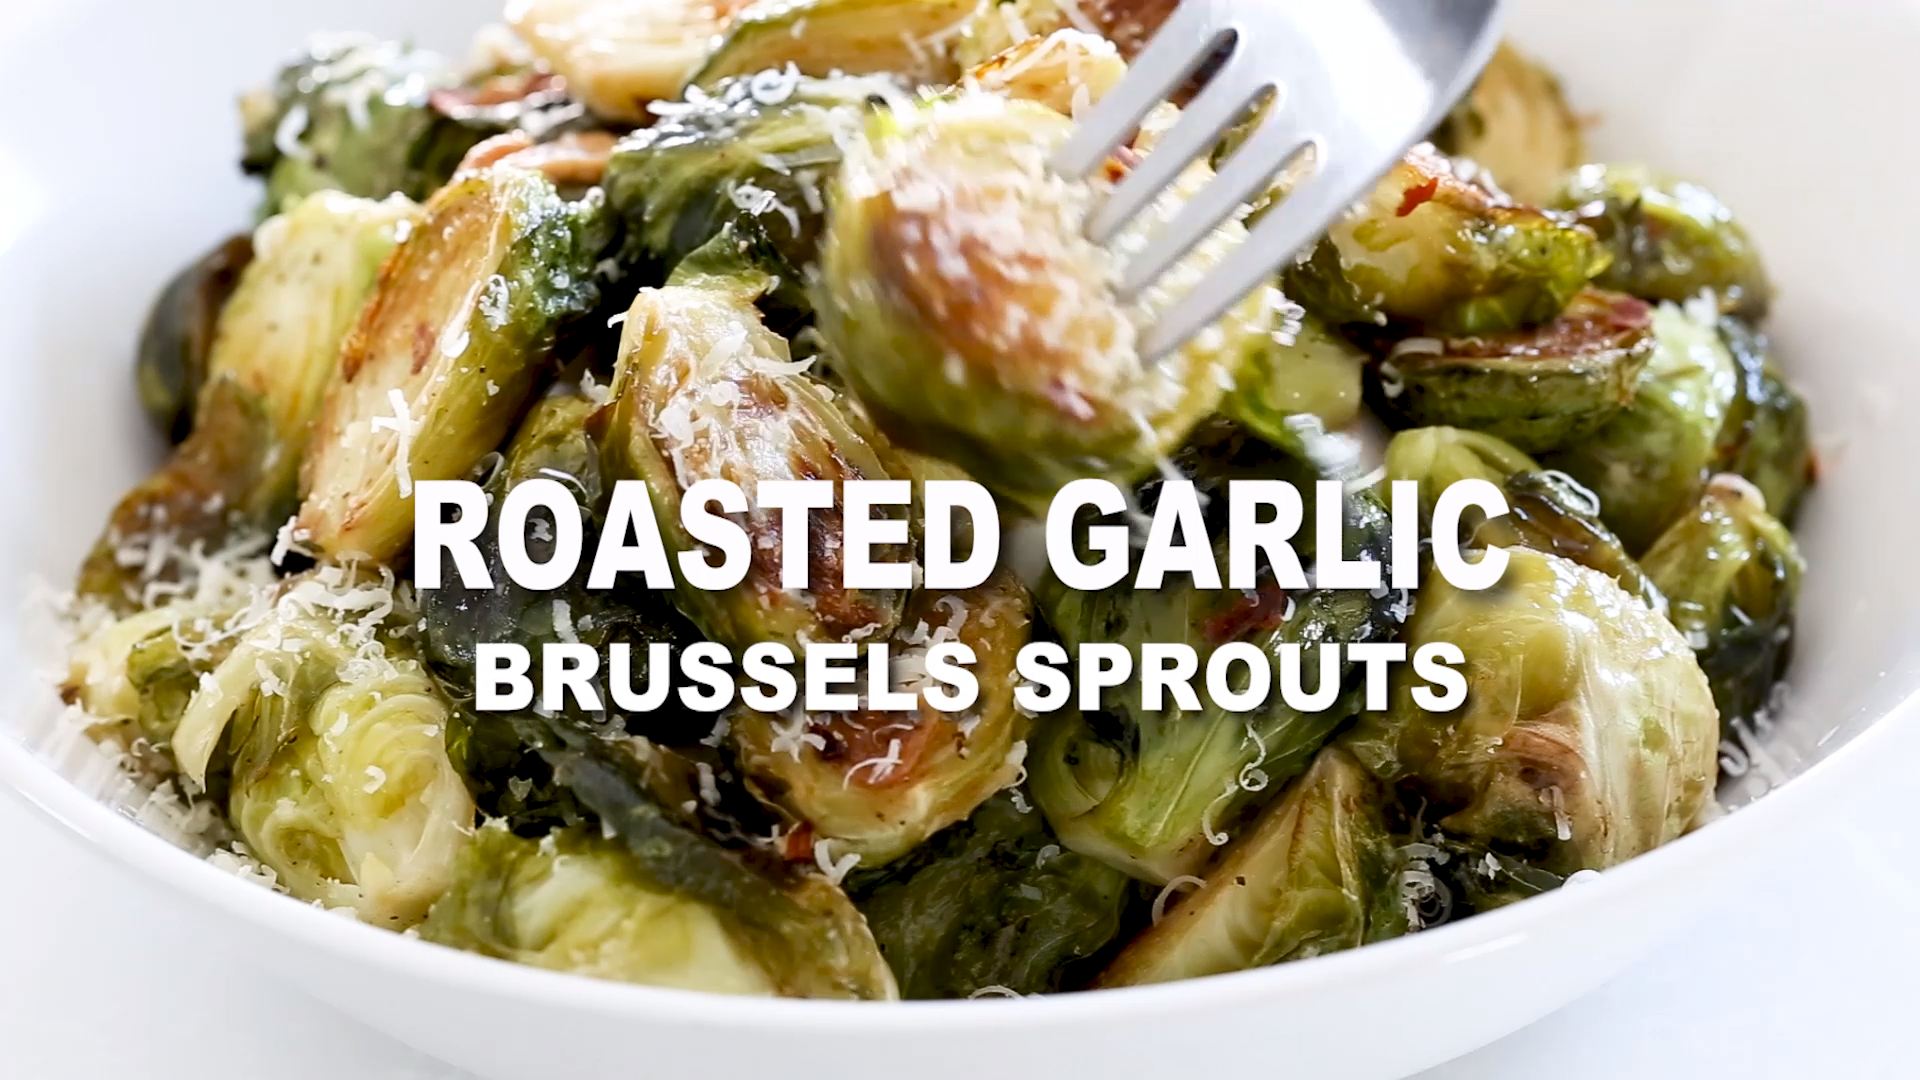 Roasted Garlic Brussels Sprouts - Roasted Garlic Brussels Sprouts -   19 thanksgiving recipes side dishes healthy ideas